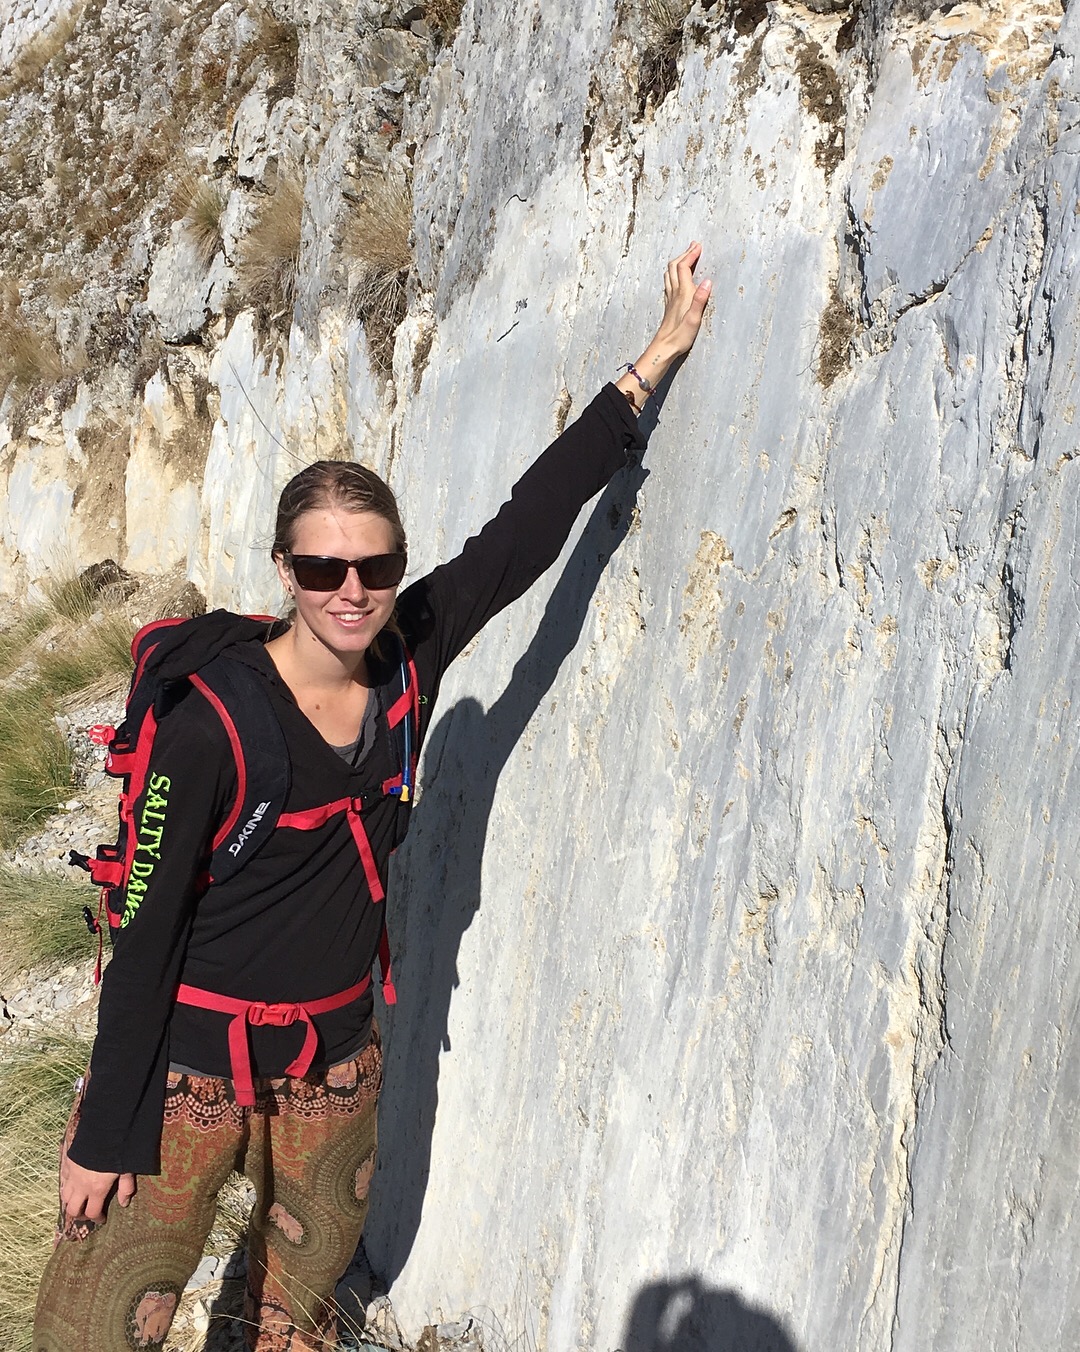 GEM Hazard Scientist Kendra Johnson at a fault scarp from the 2016 Norcia and
Amatrice earthquakes in Central Italy.